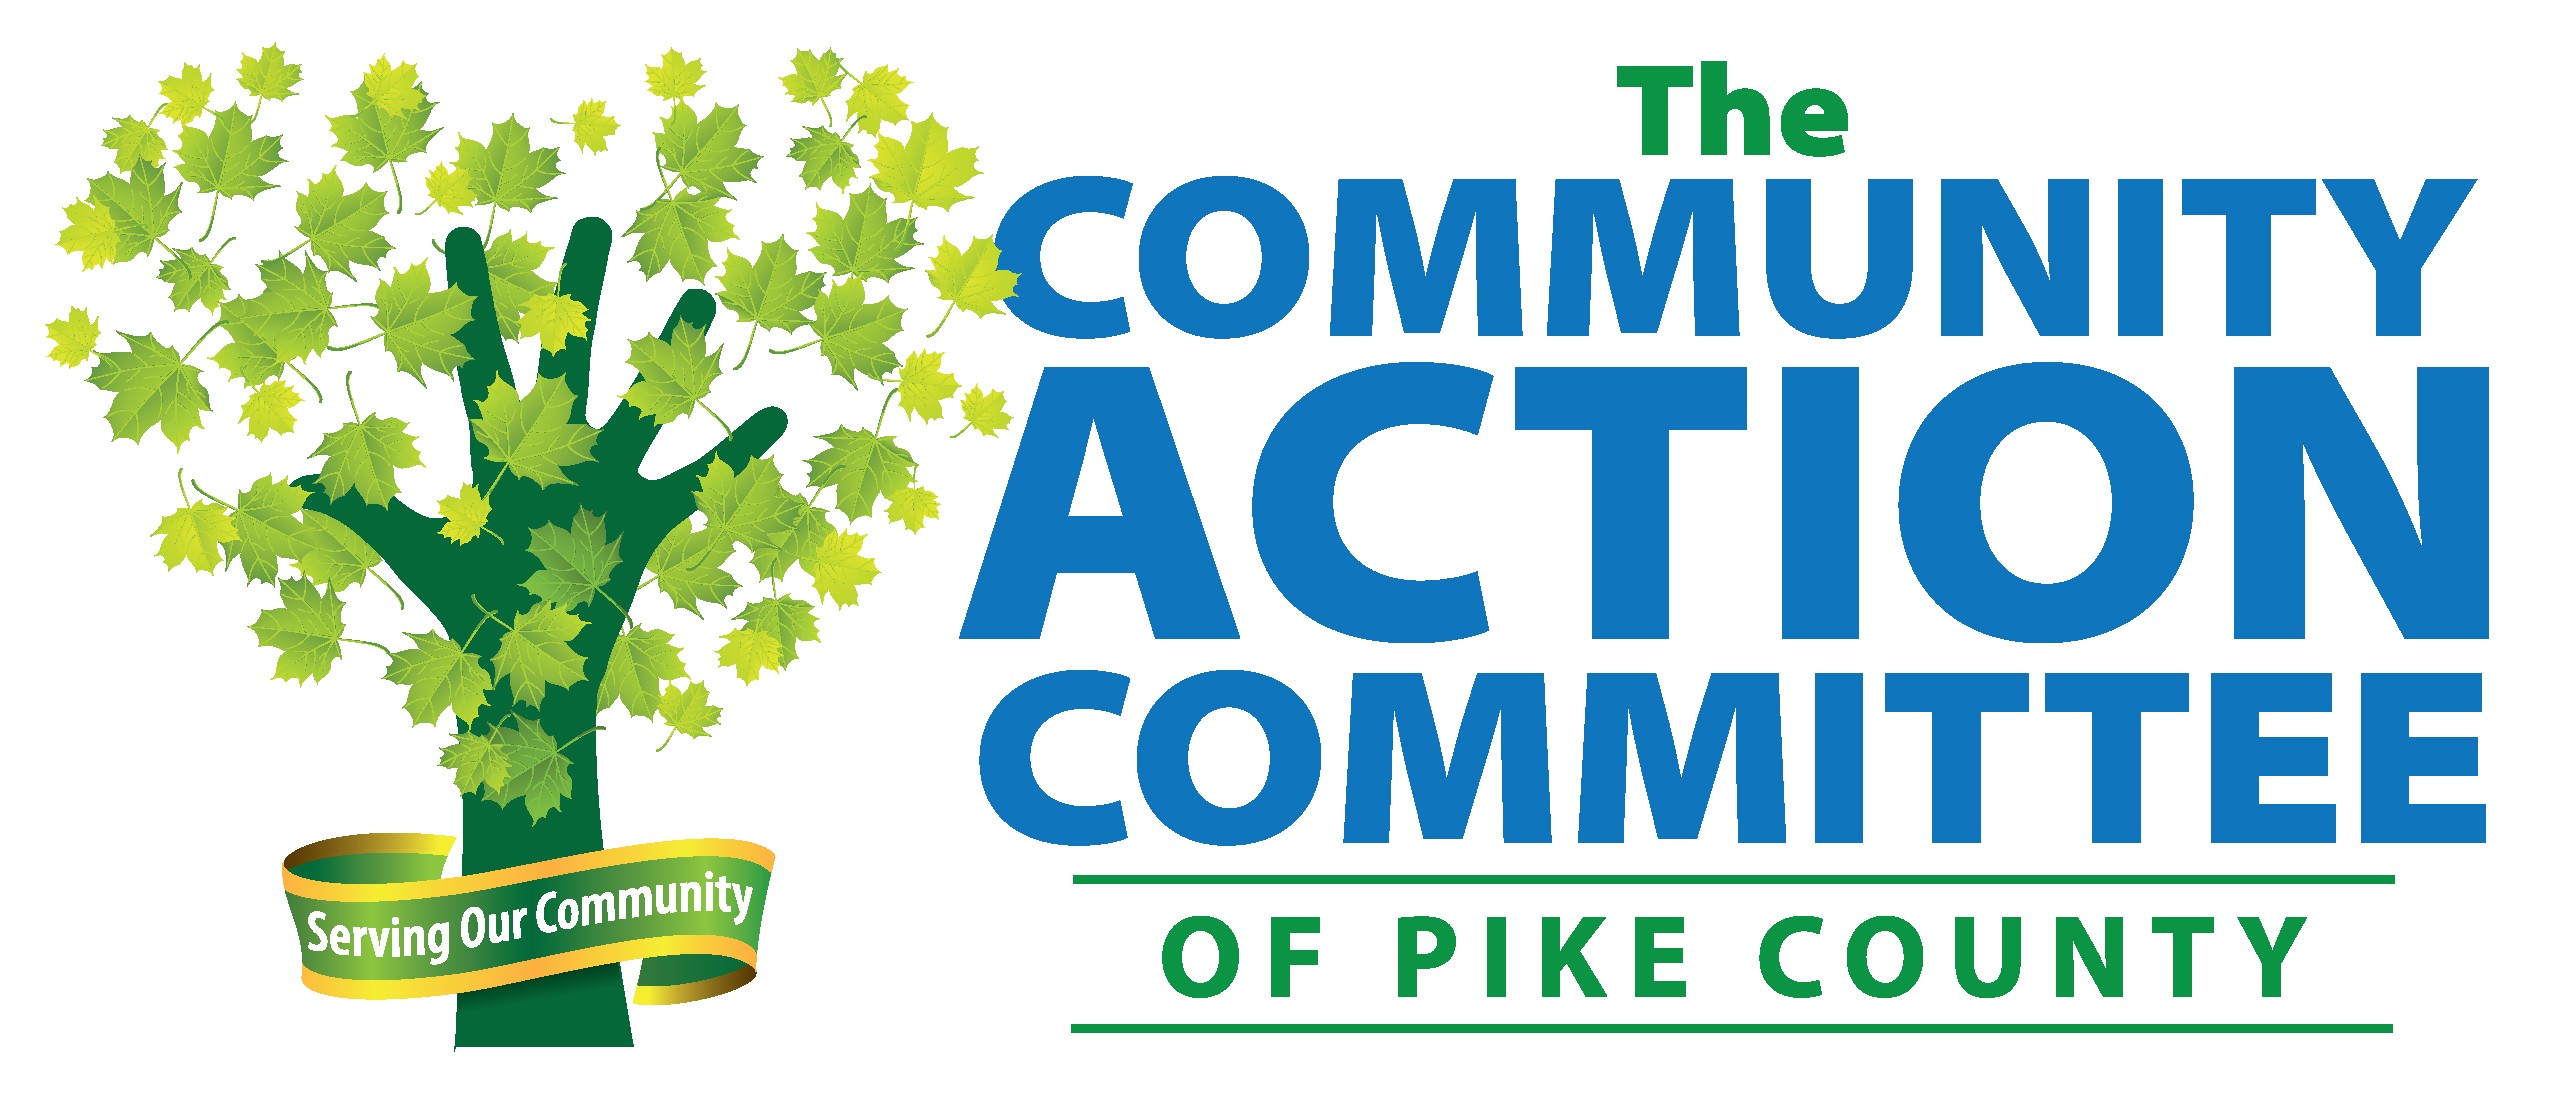 community-action-committee-of-pike-county